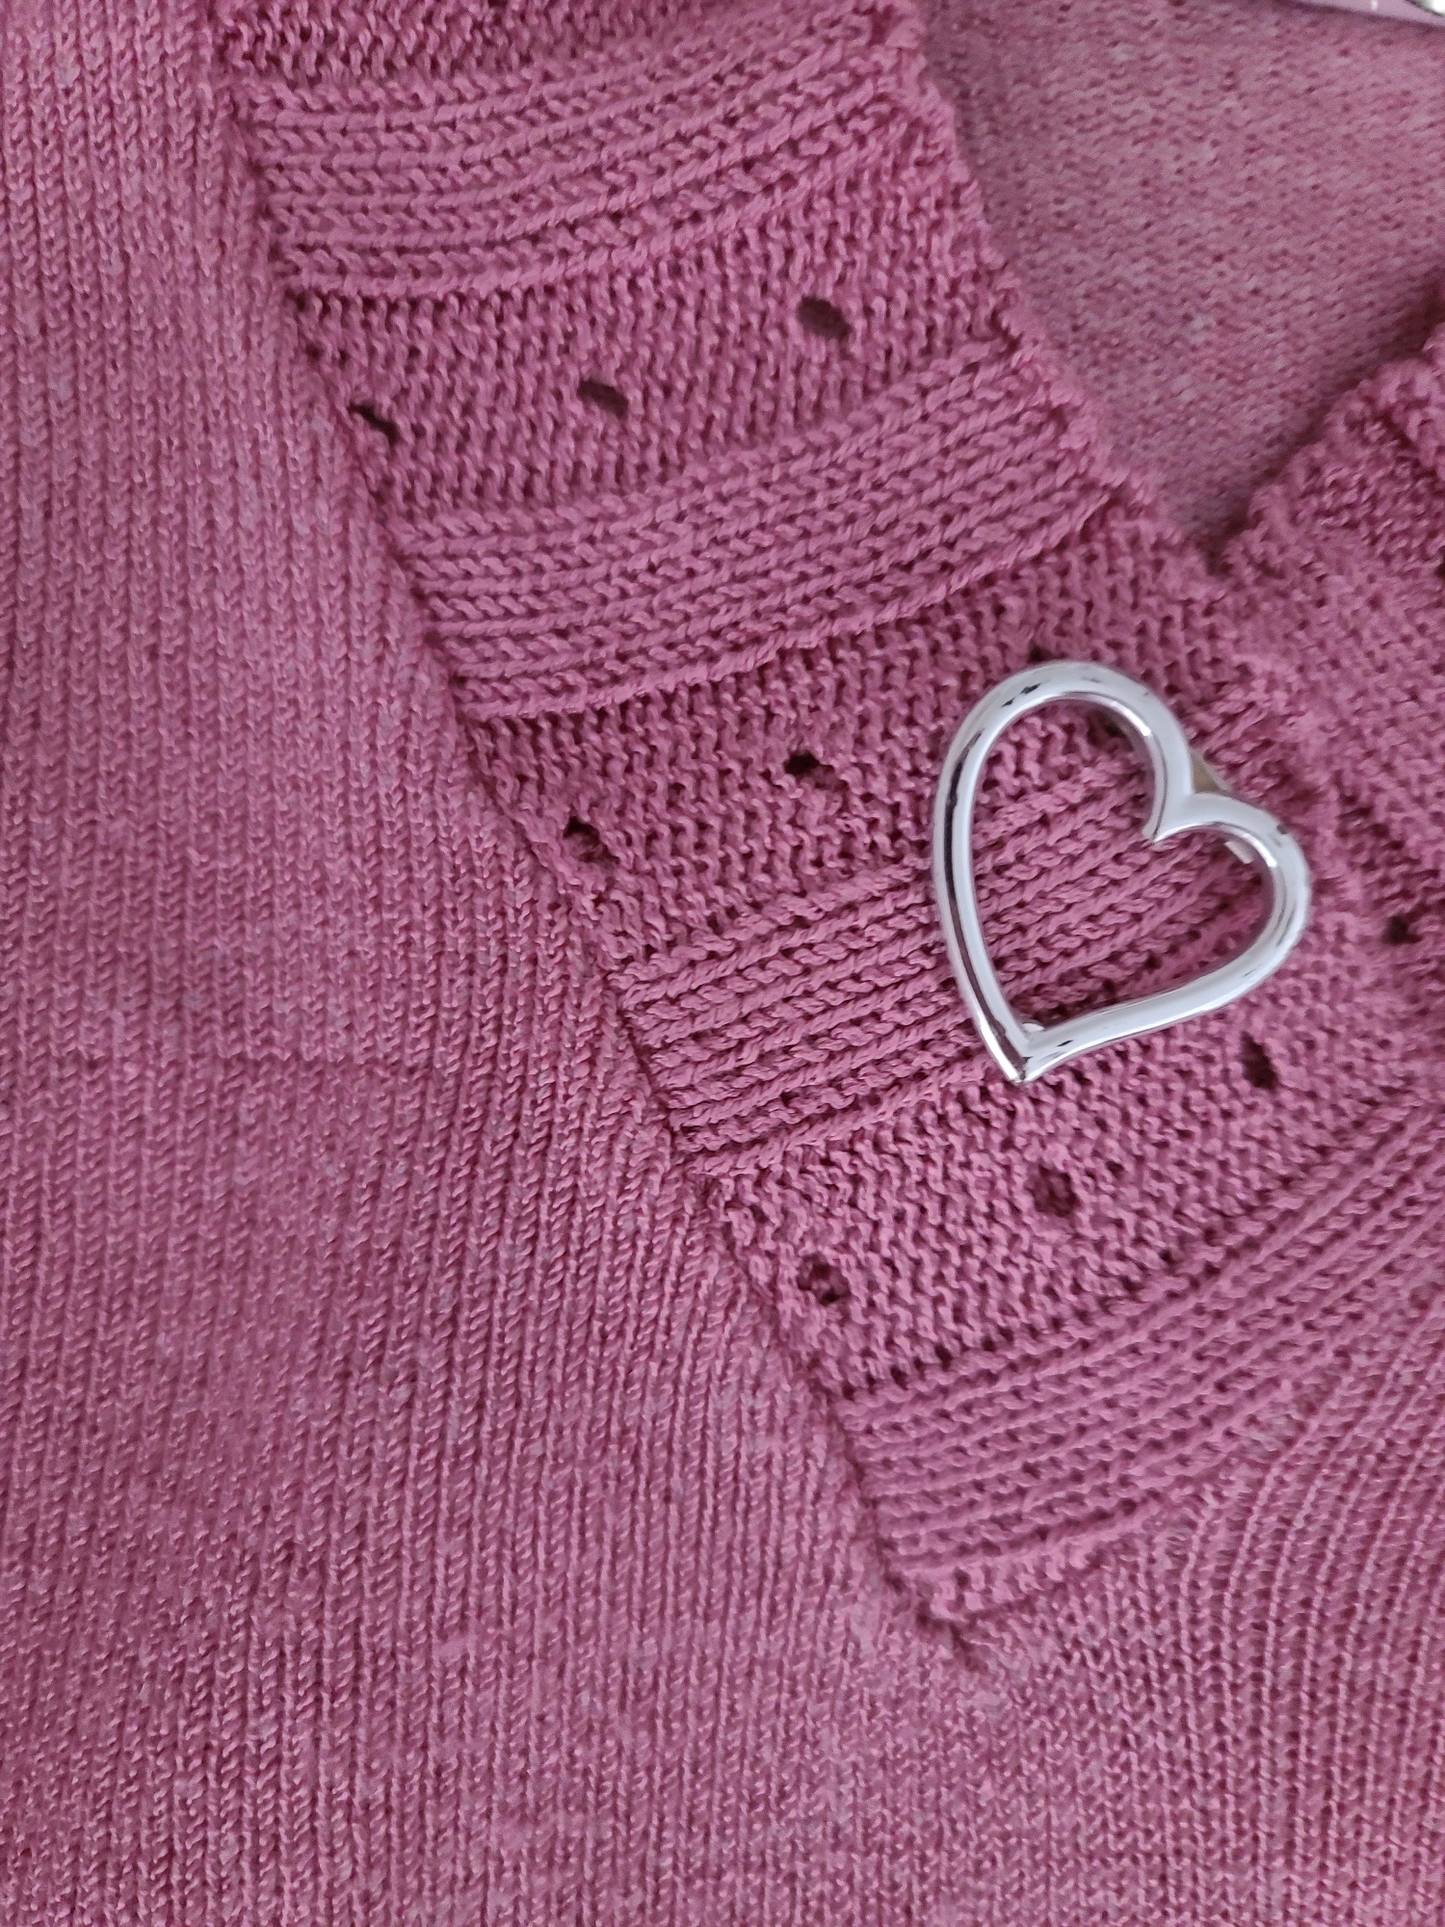 90s pink coquette sweater